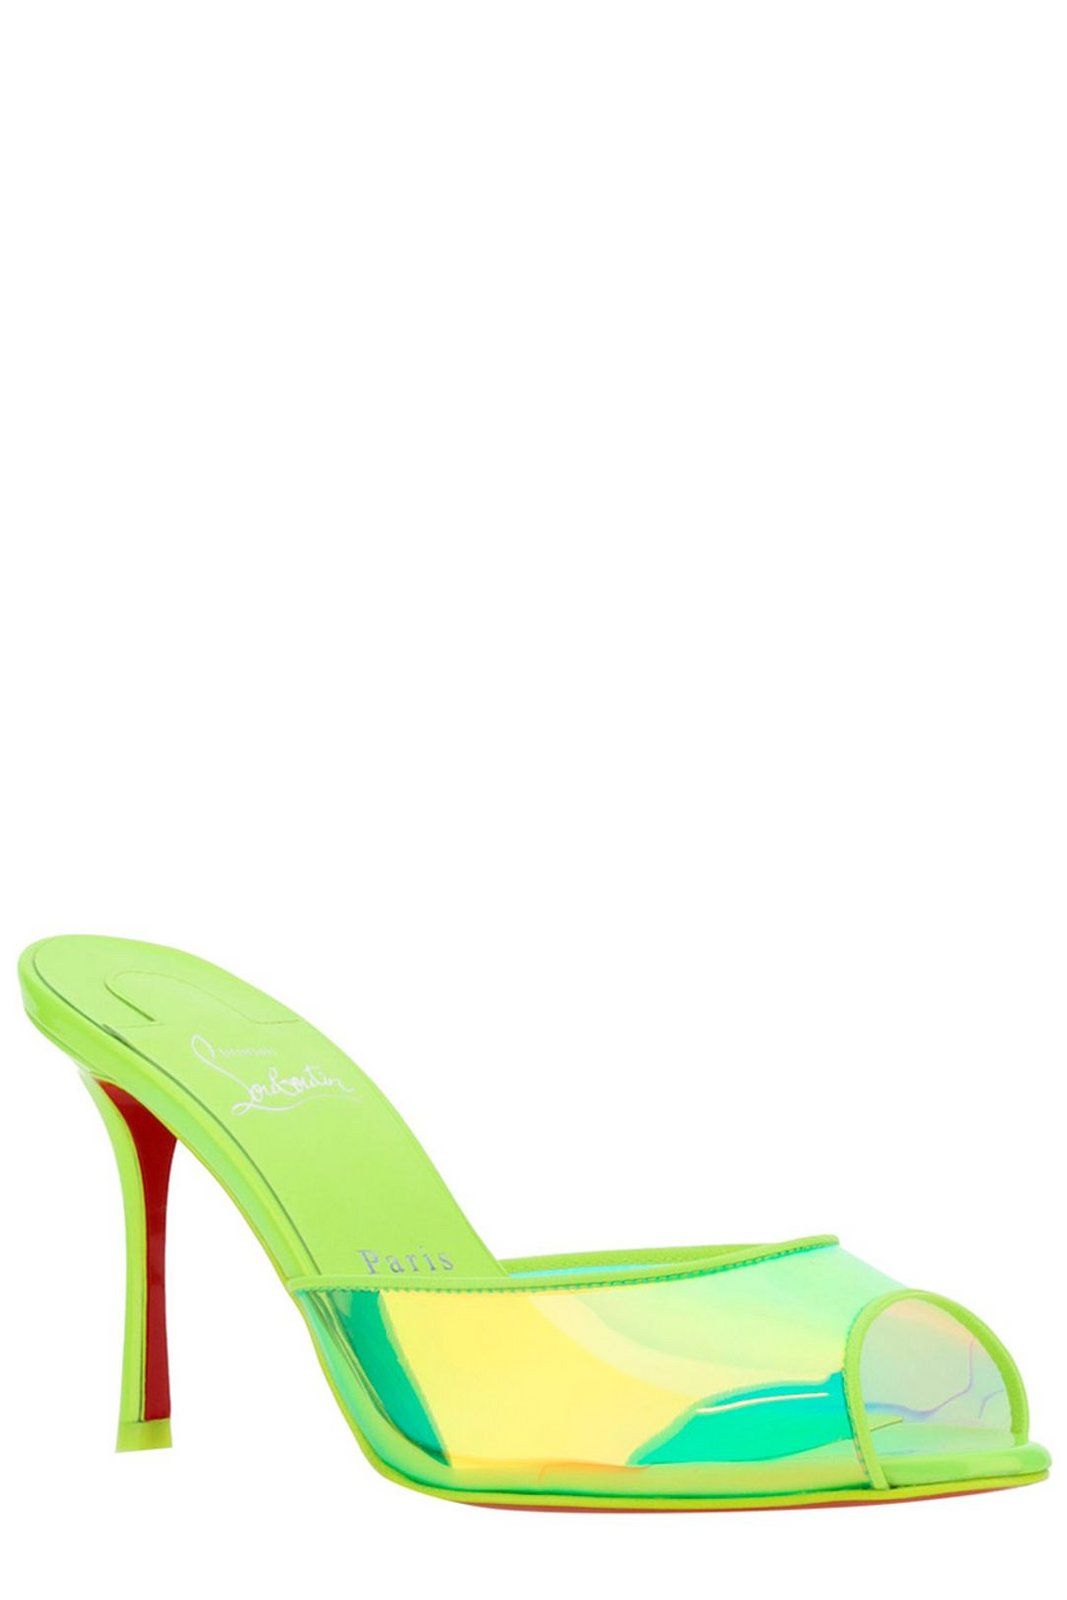 Christian Louboutin Me Dolly Slip-On Sandals | Cettire Global